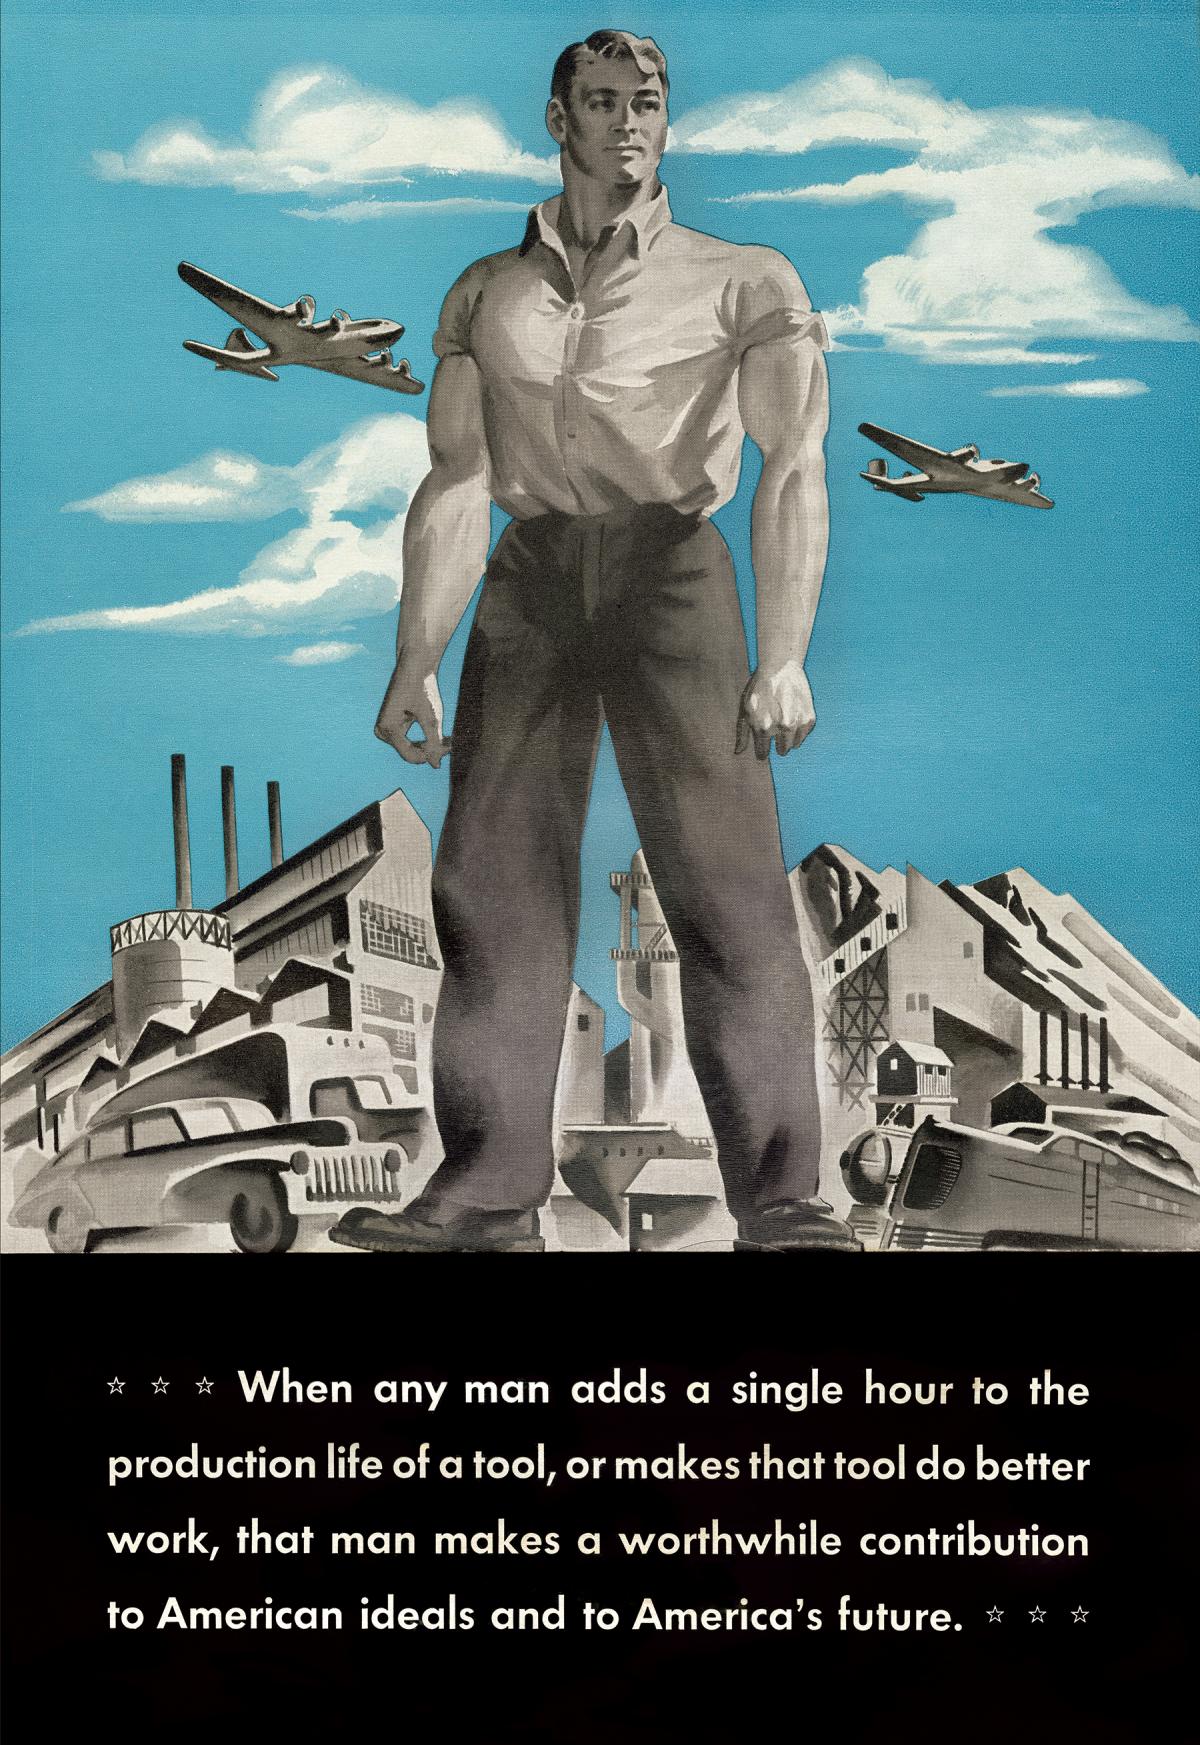 antique poster of a man standing in front of a blue sky, industrial tools behind him